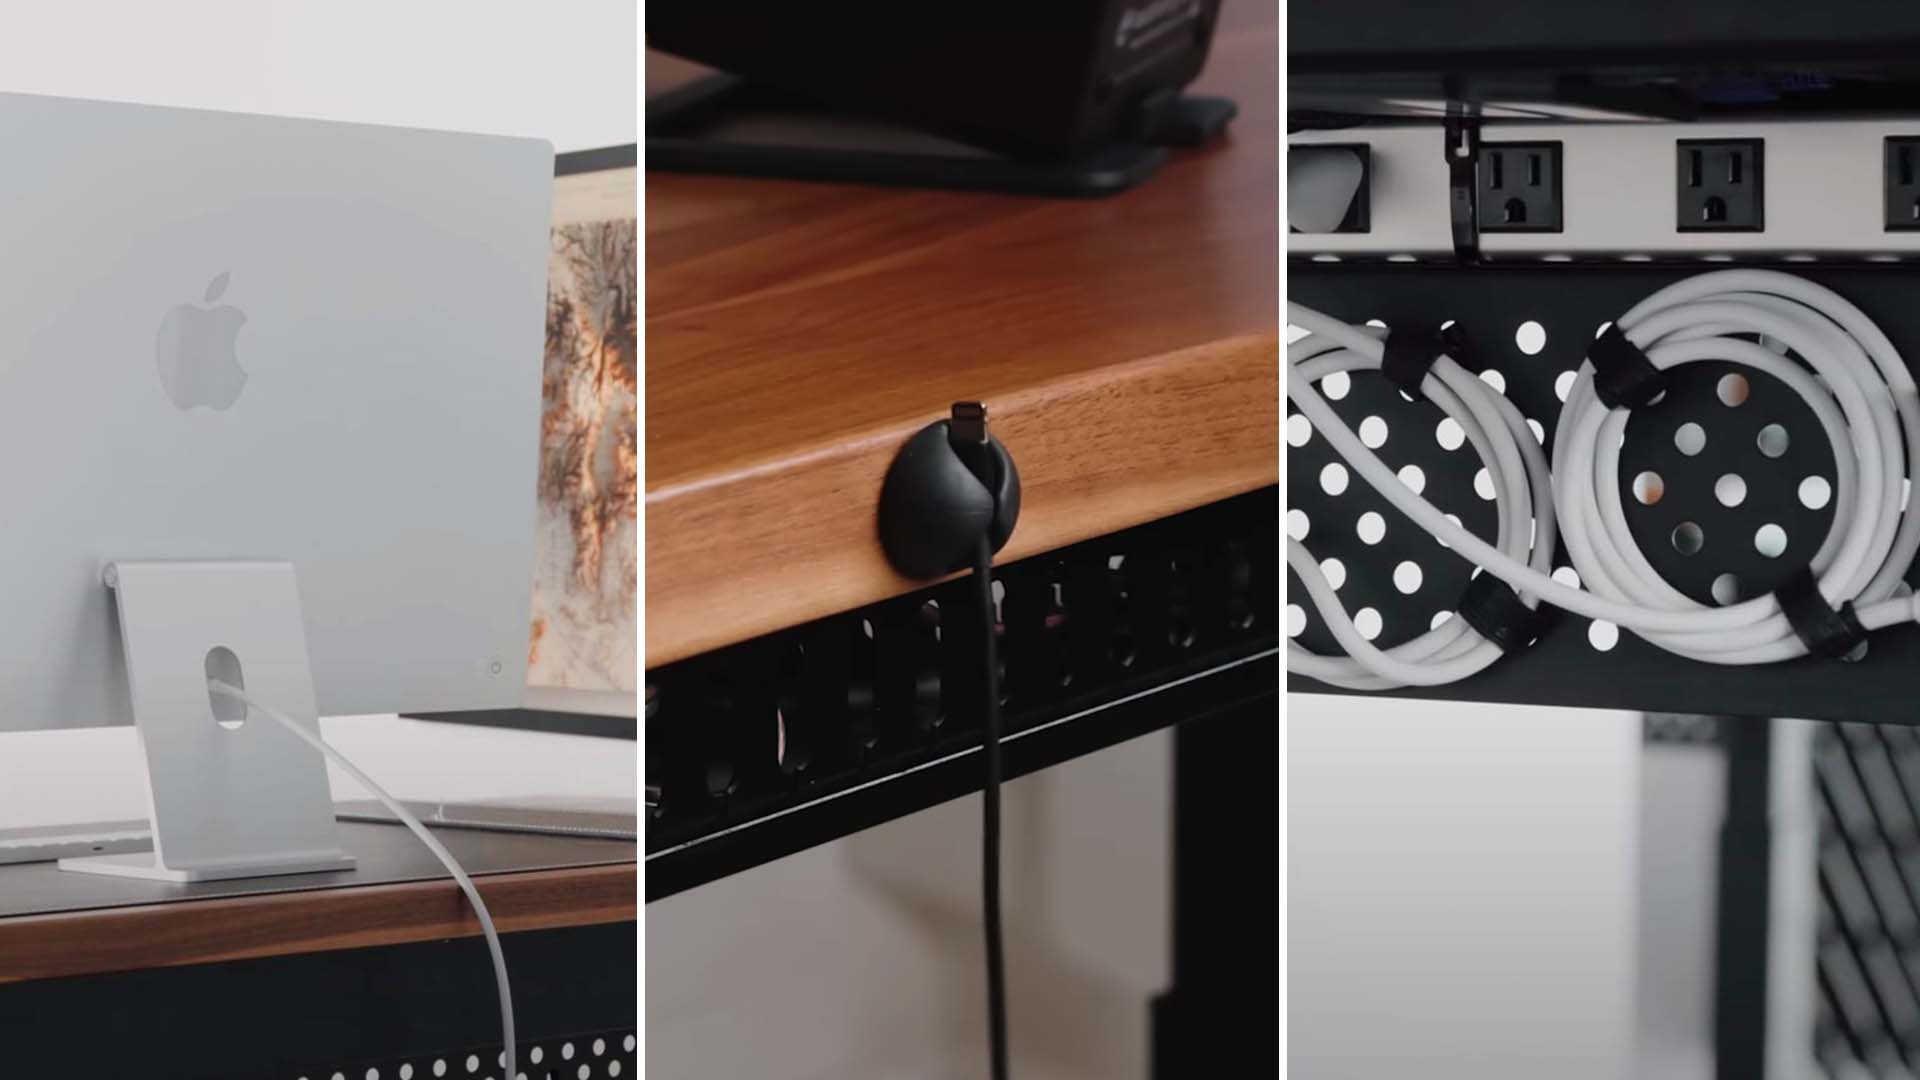 15 Ways to Hide & Tidy Your Desk Wires, Cables & Cords